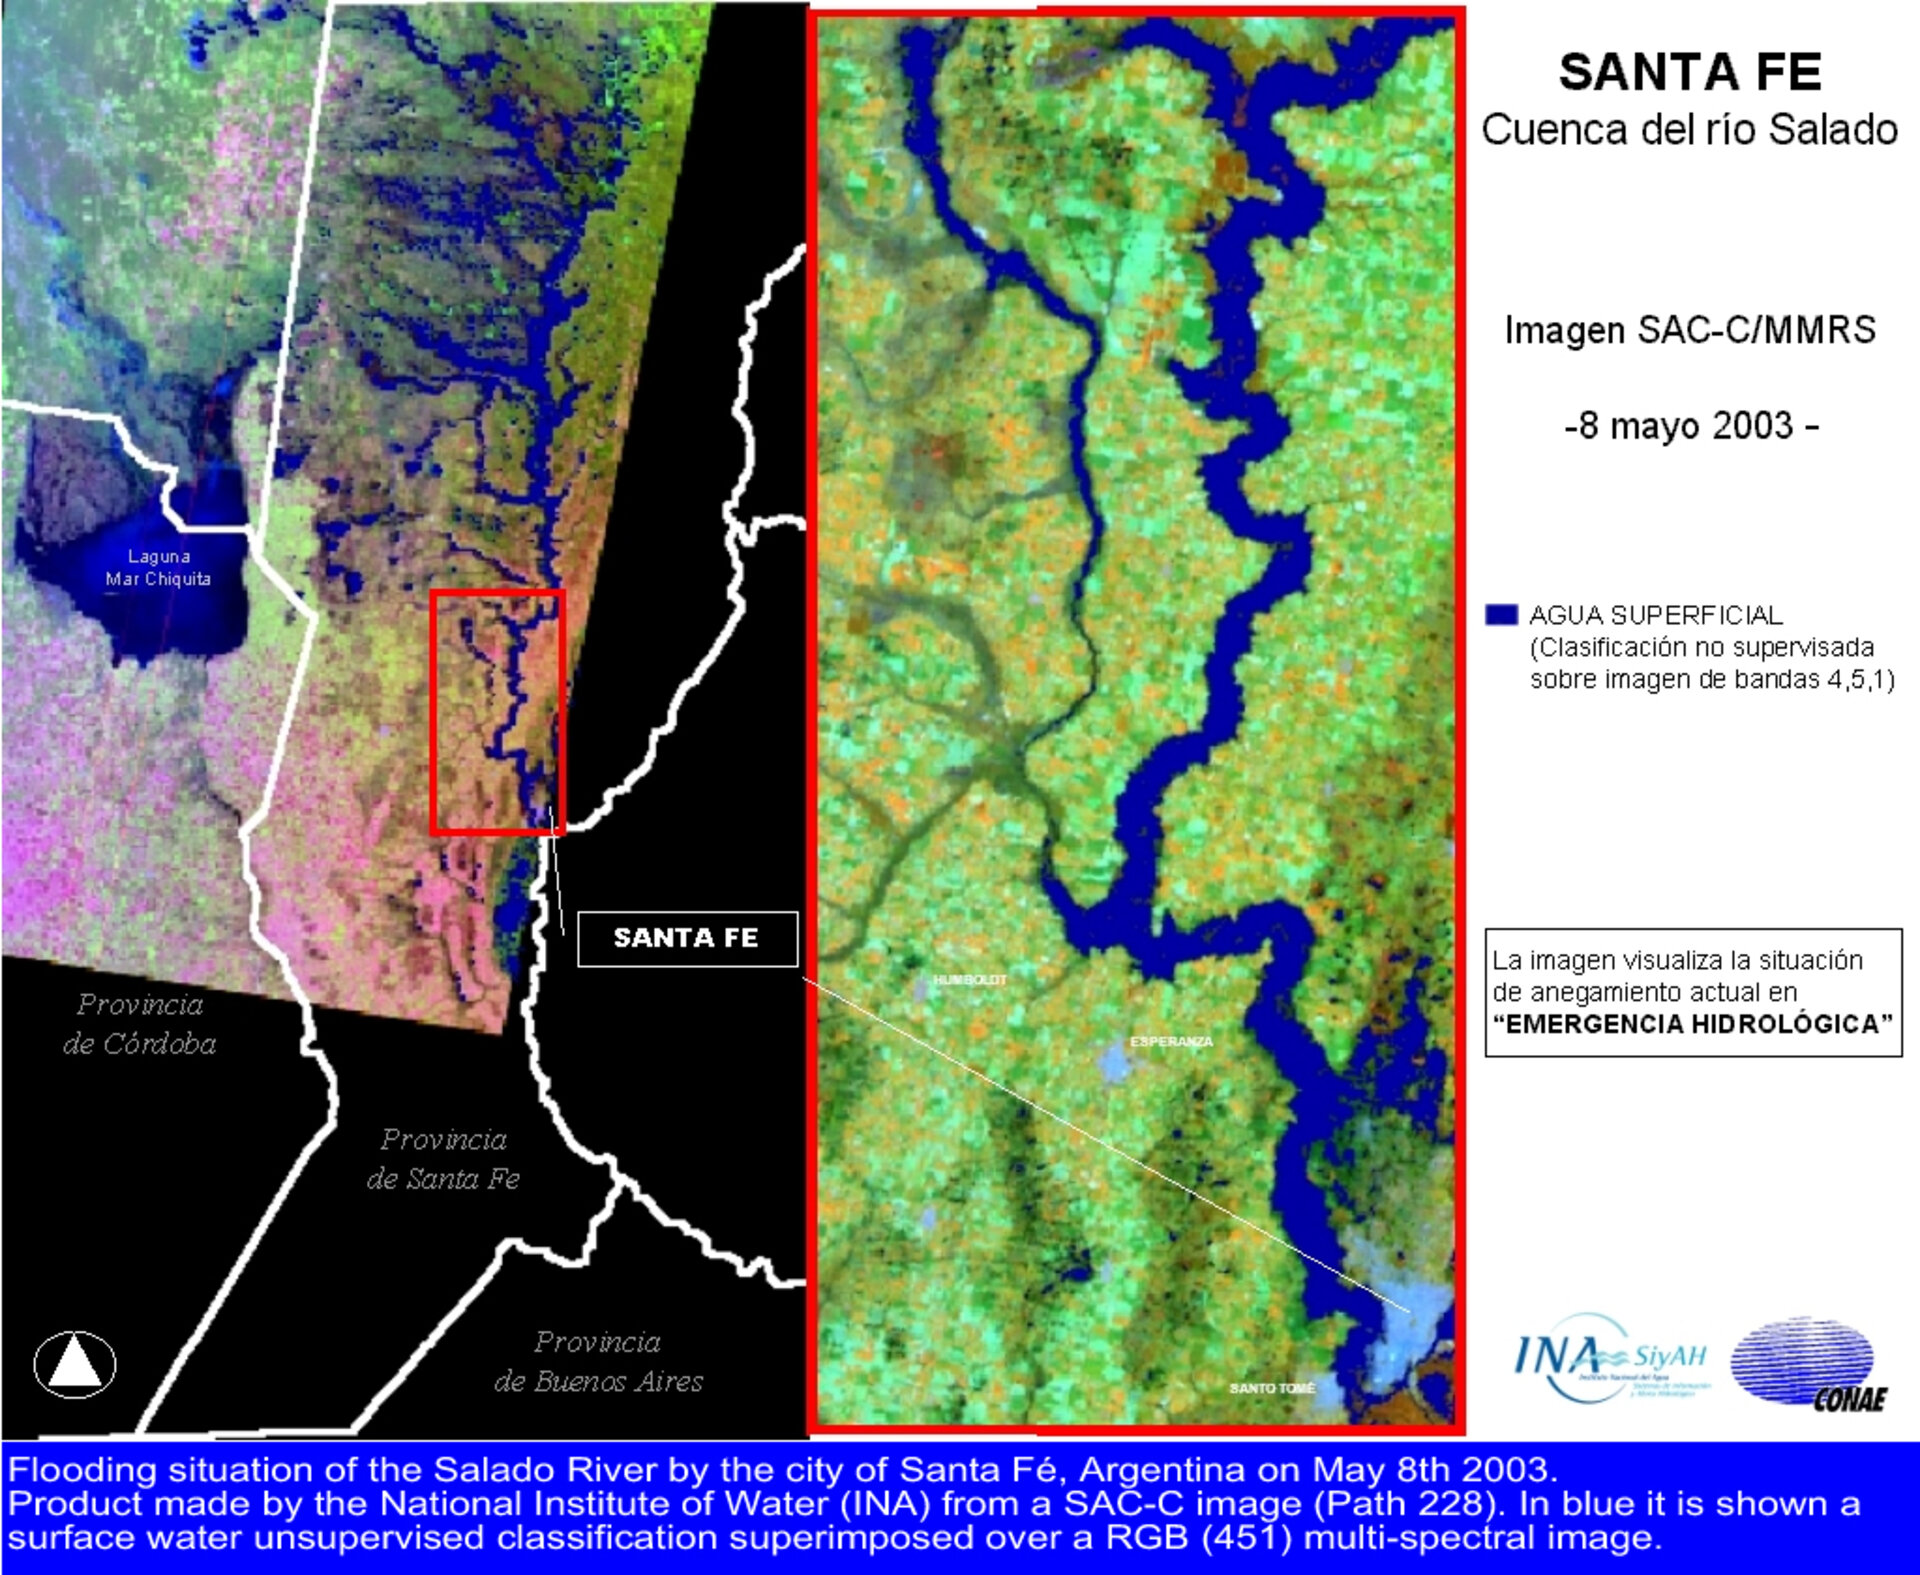 SAC-C imagery helps assess flood damage in Santa Fe city